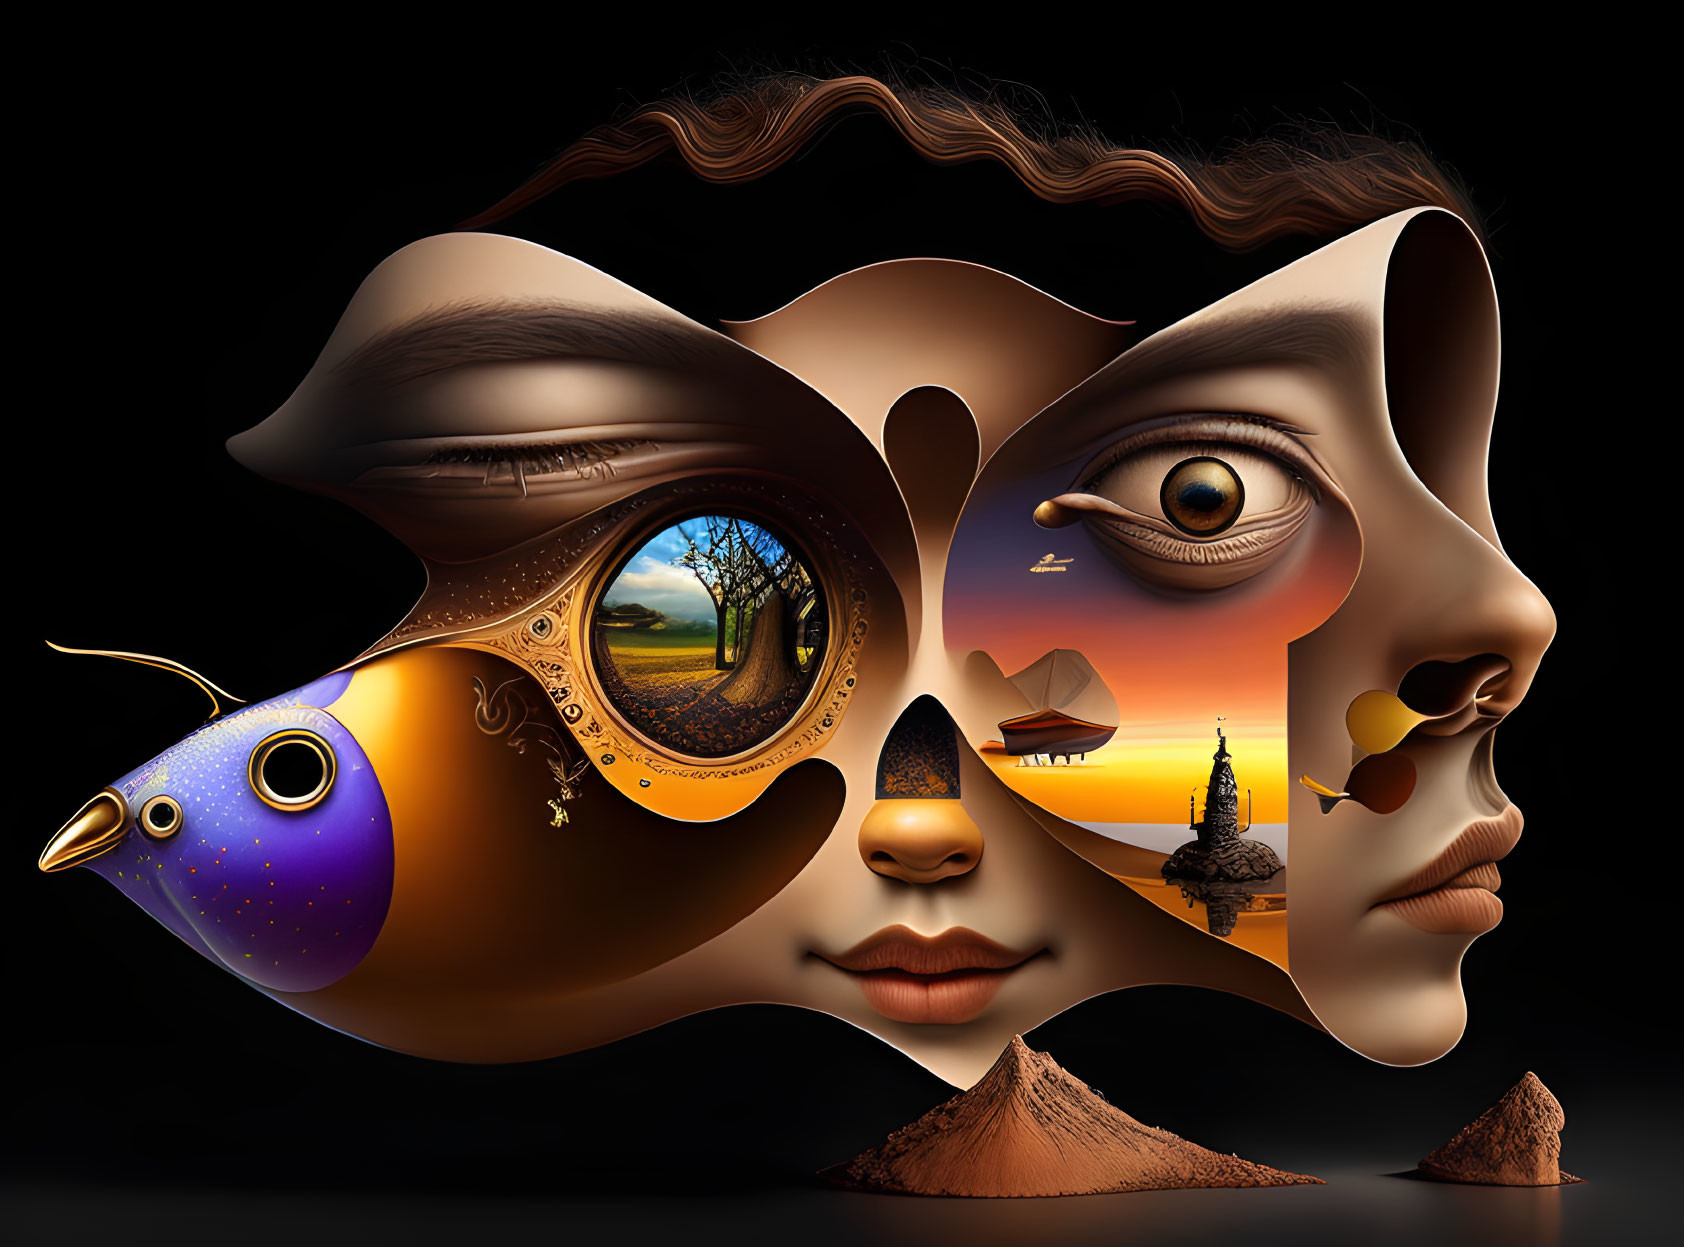 Fragmented face with butterfly wing and landscape eye against black background